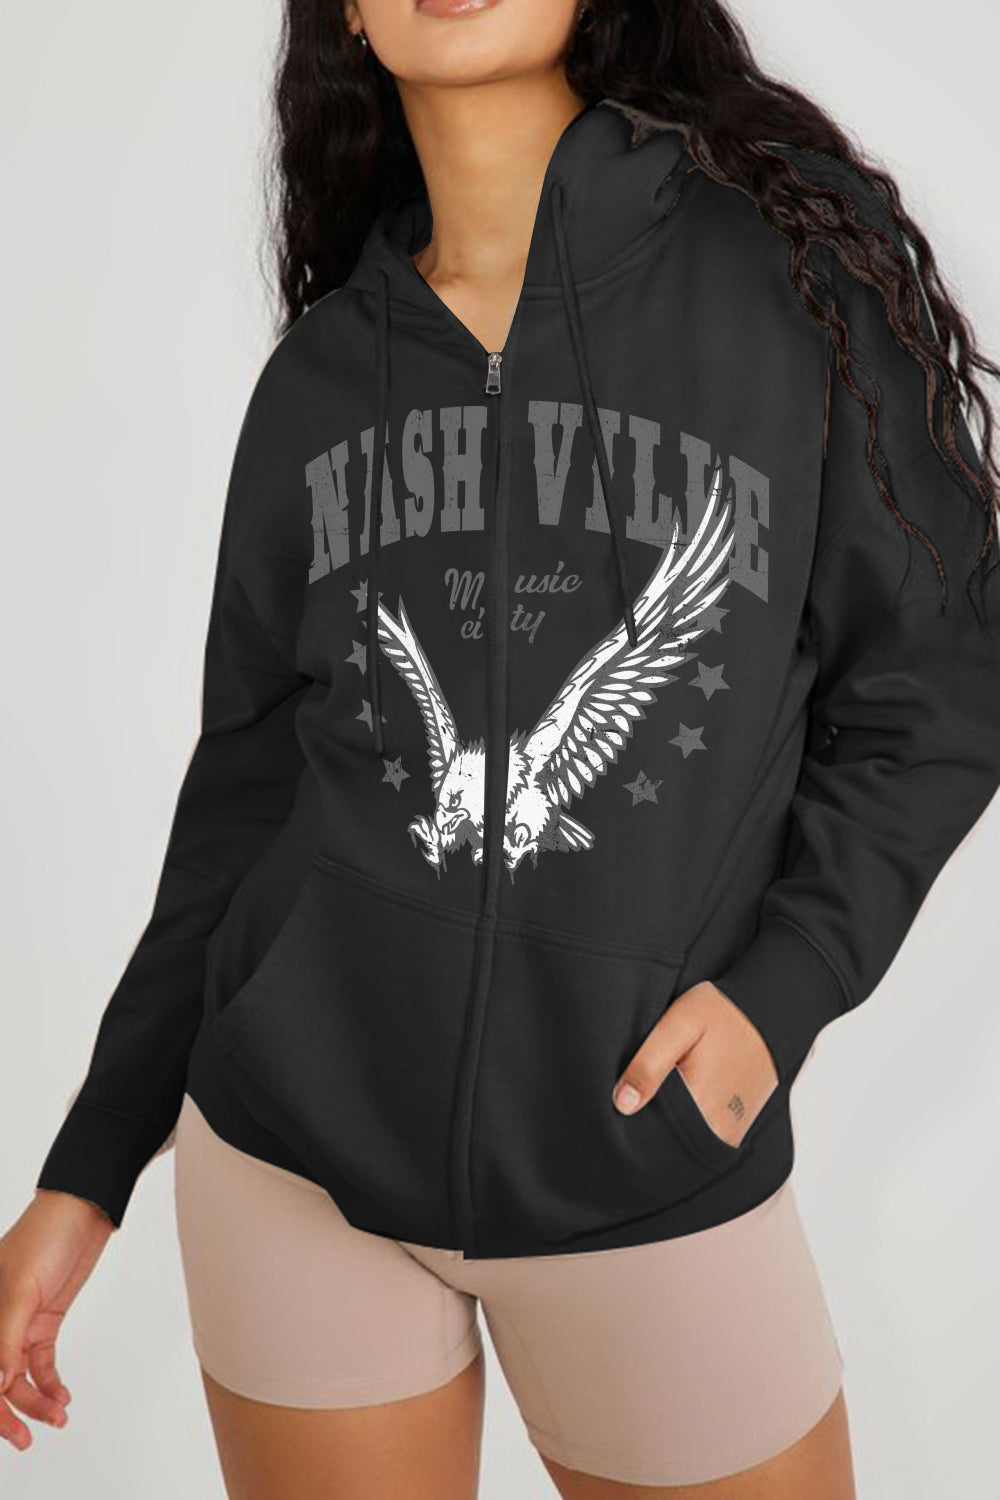 Simply Love Full Size NASHVILLE MUSIC CITY Graphic Hoodie